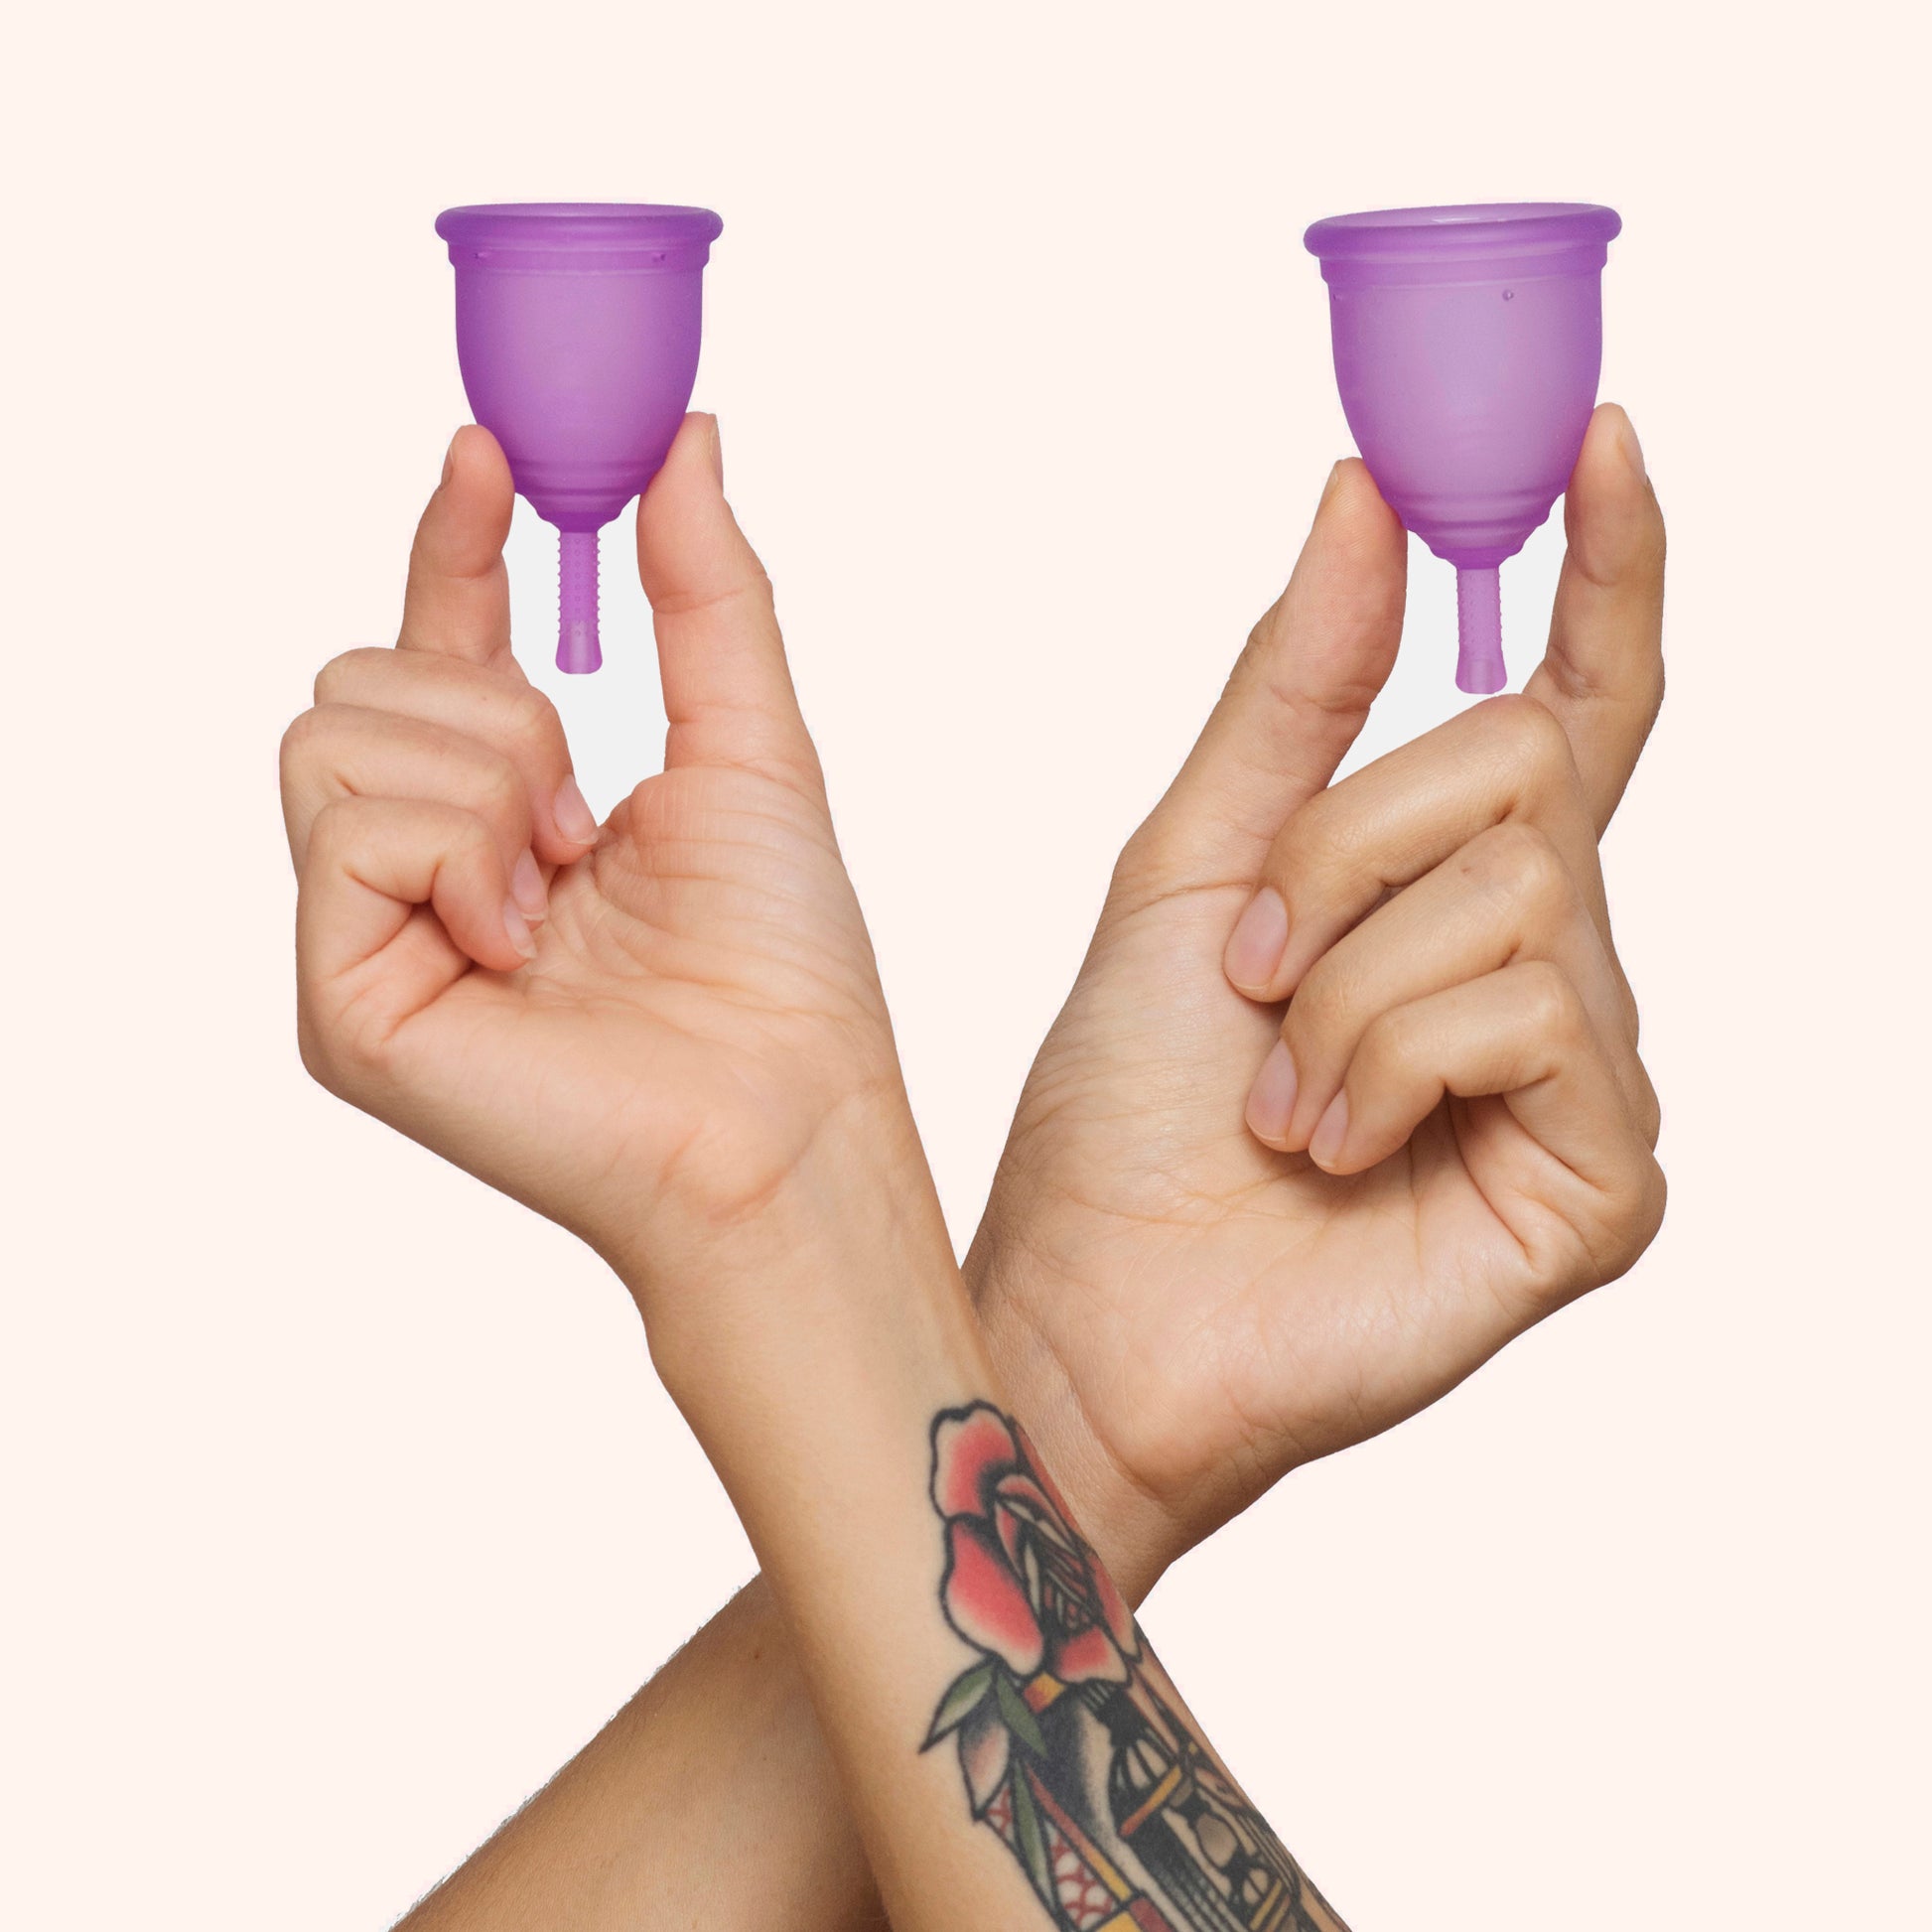 Donate Ruby Cup - Menstrual cup donation